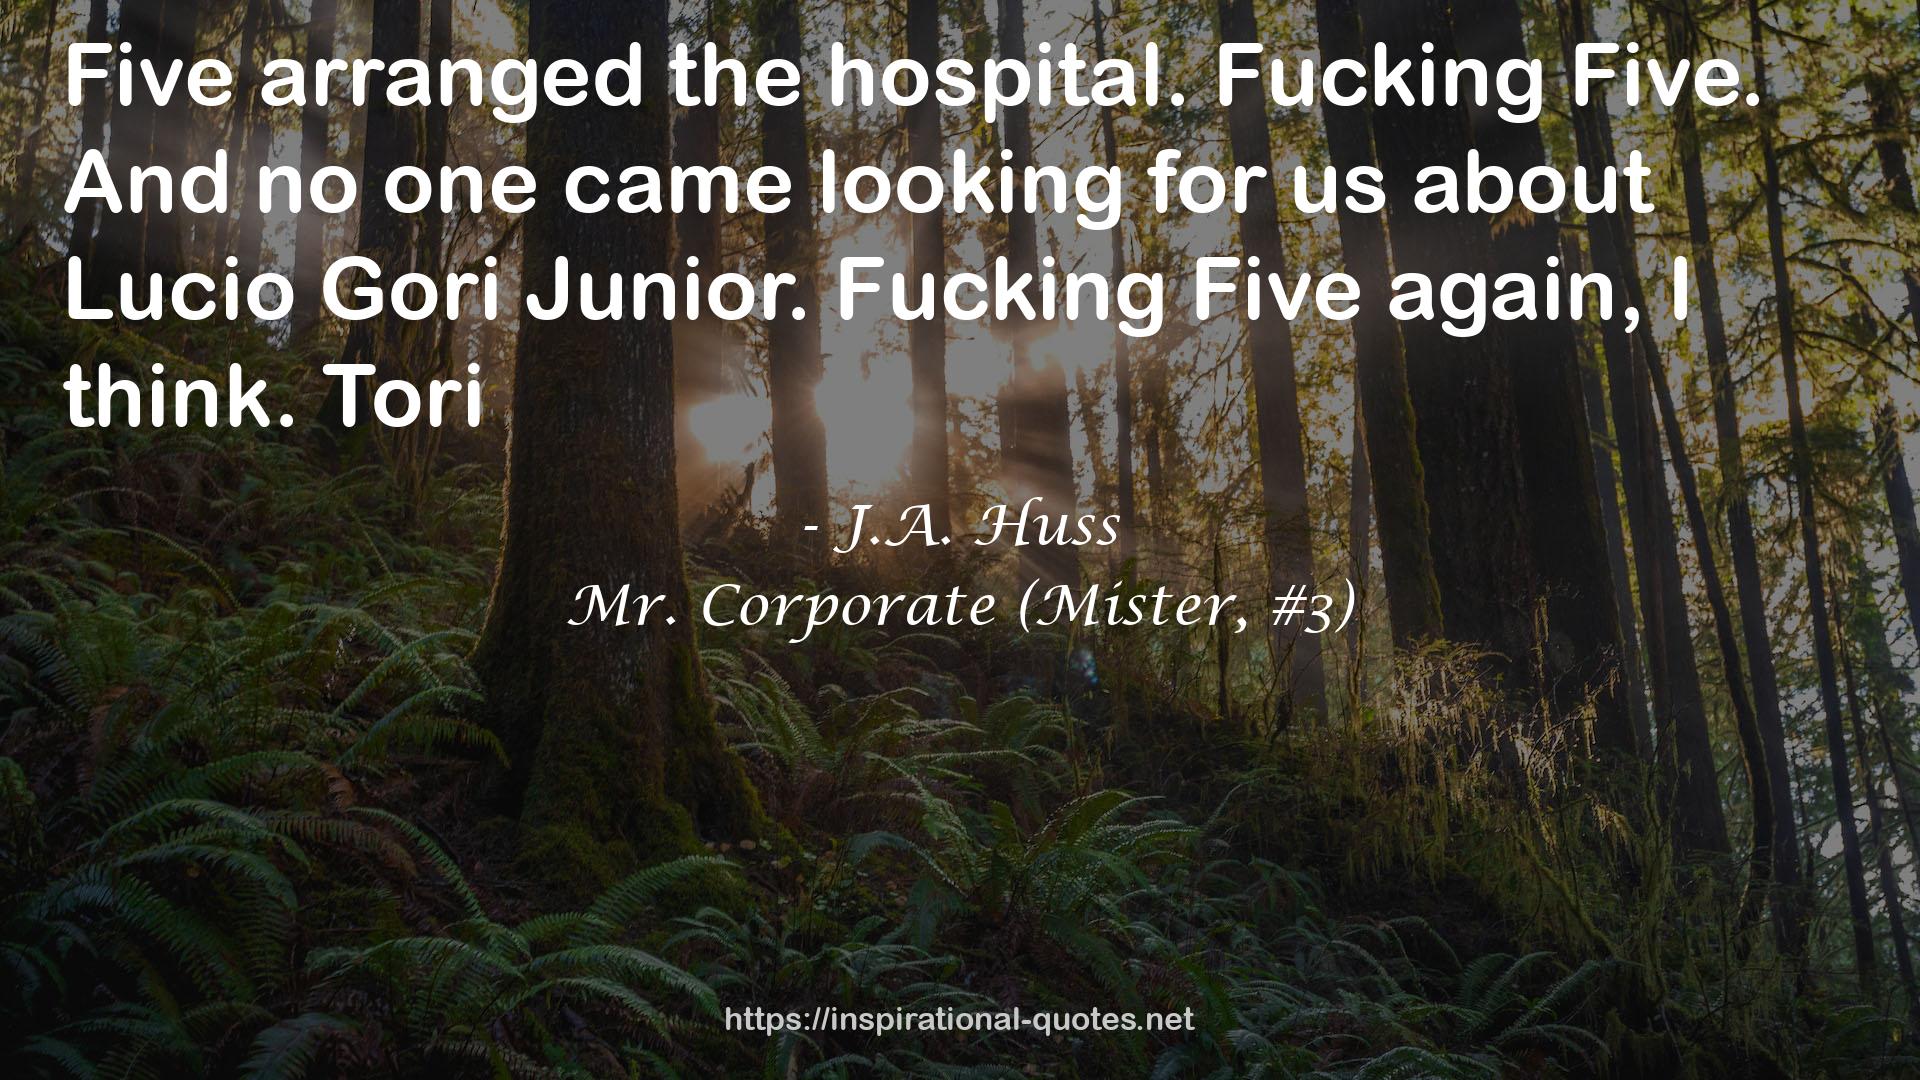 Mr. Corporate (Mister, #3) QUOTES